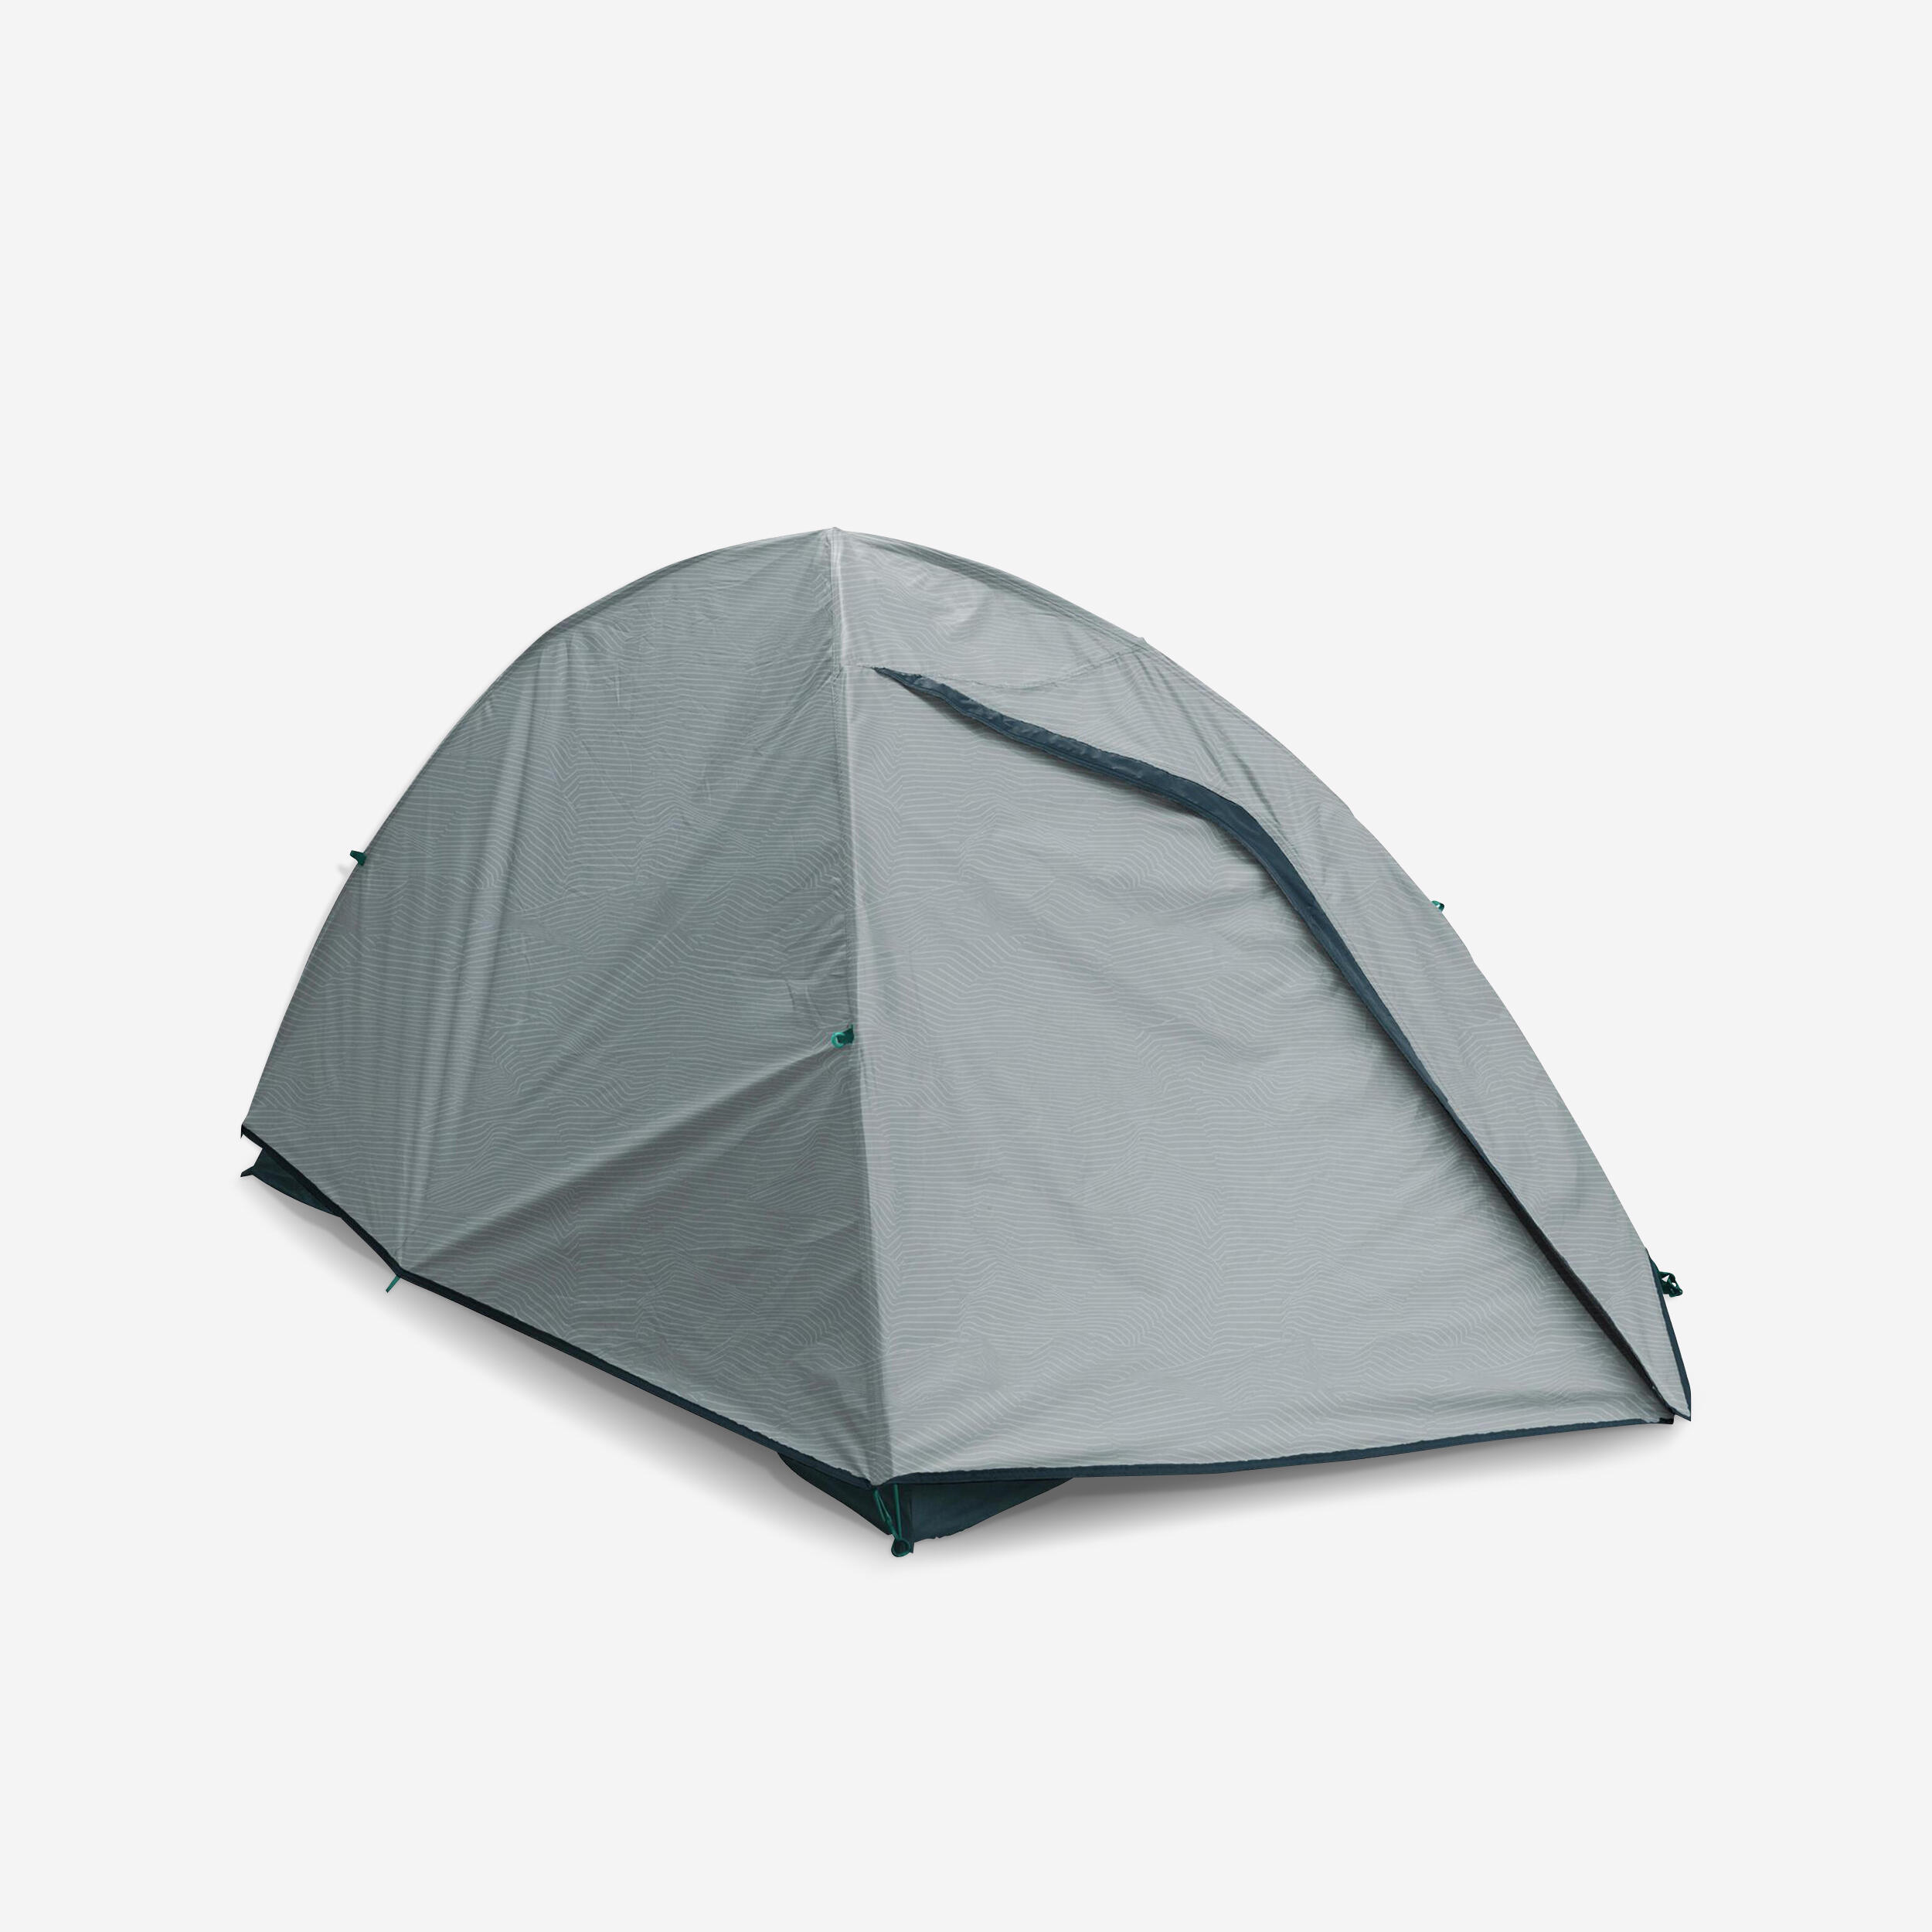 FLYSHEET - SPARE PART FOR THE MH100 2 PERSON TENT 1/1